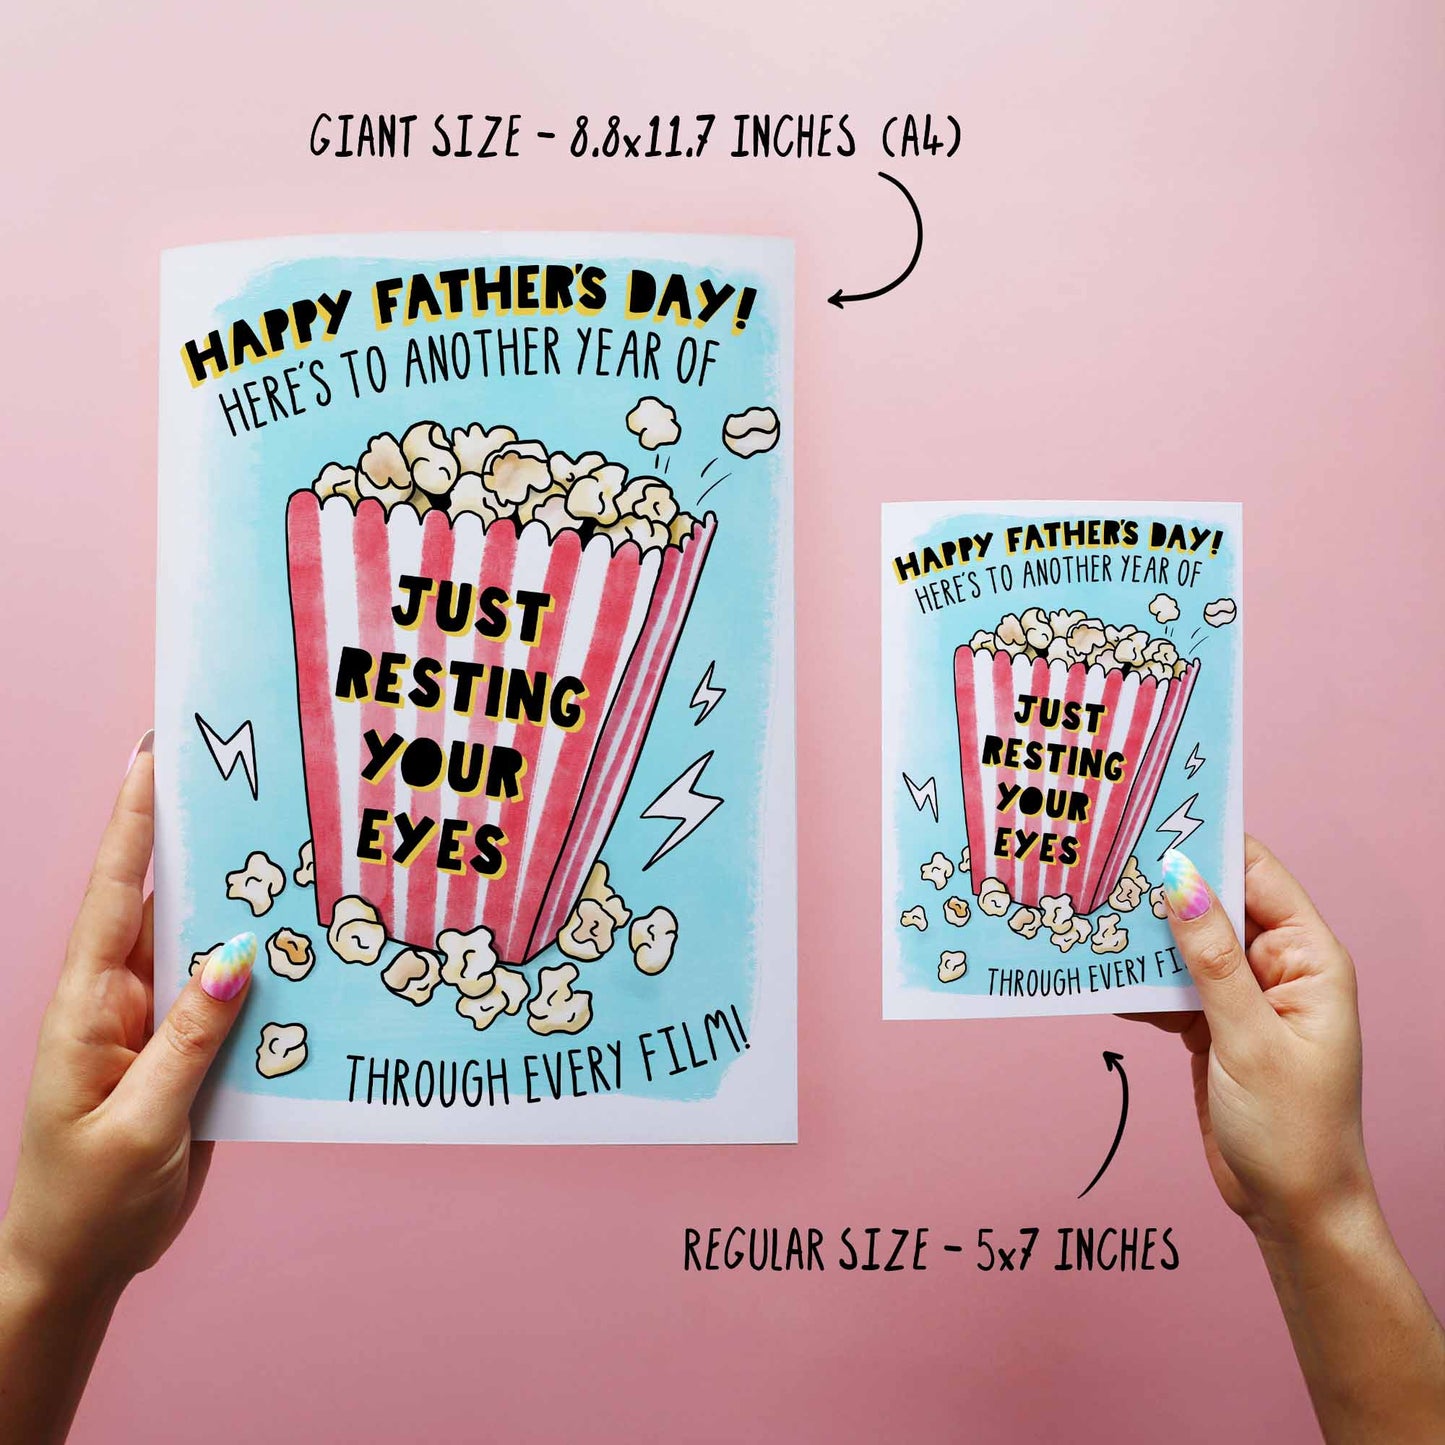 Just Resting Your Eyes - Funny Father's Day Card